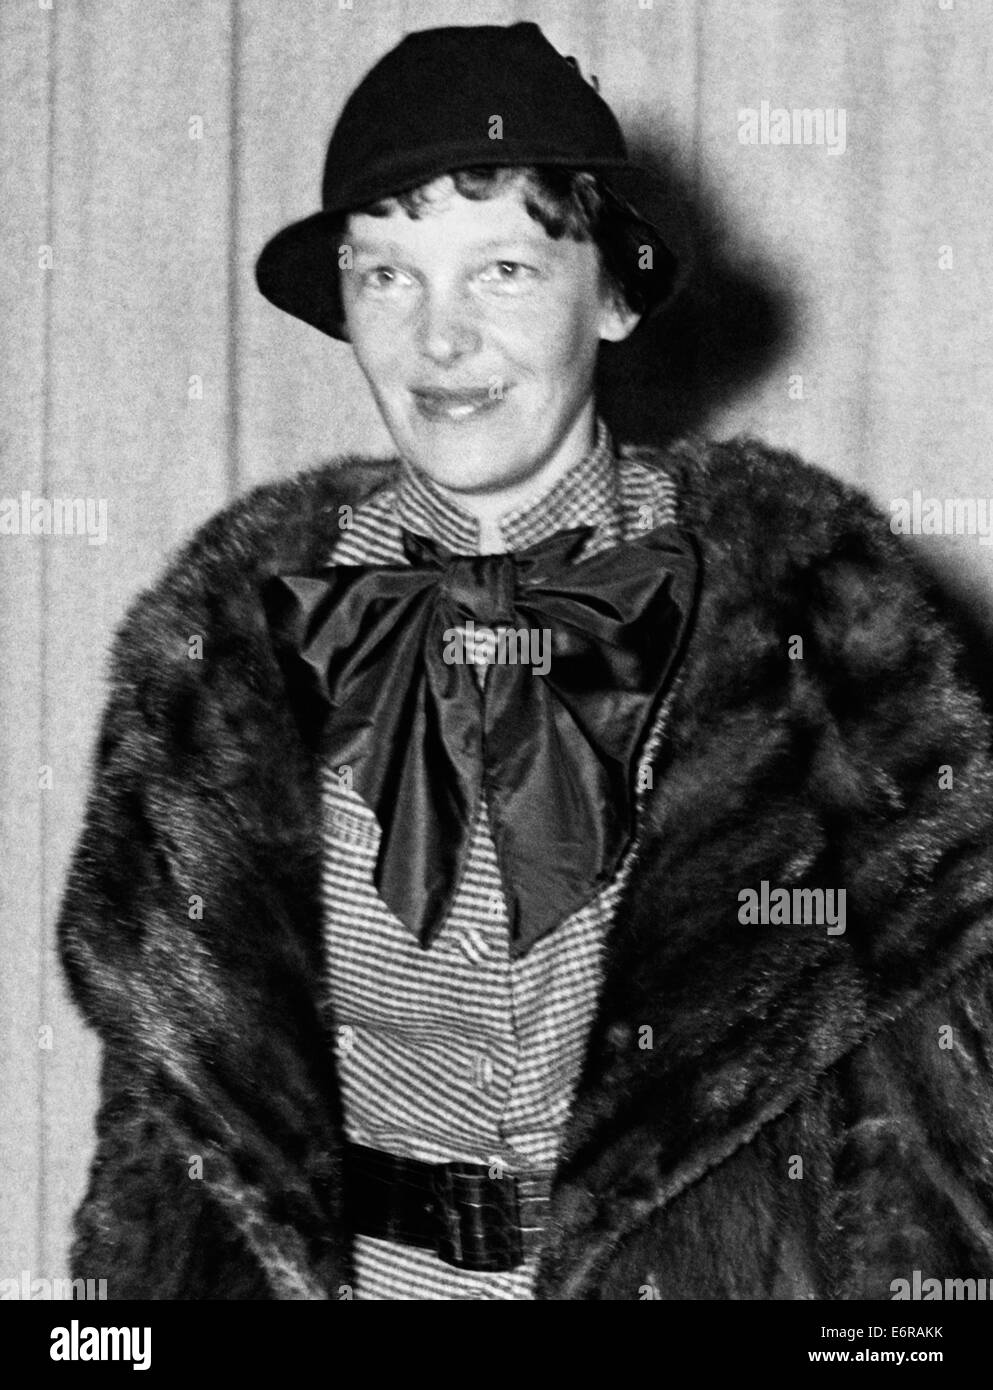 Vintage photo of American aviation pioneer and author Amelia Earhart (1897 – declared dead 1939) – Earhart and her navigator Fred Noonan famously vanished in 1937 while she was trying to become the first female to complete a circumnavigational flight of the globe. Photo taken in 1935. Stock Photo